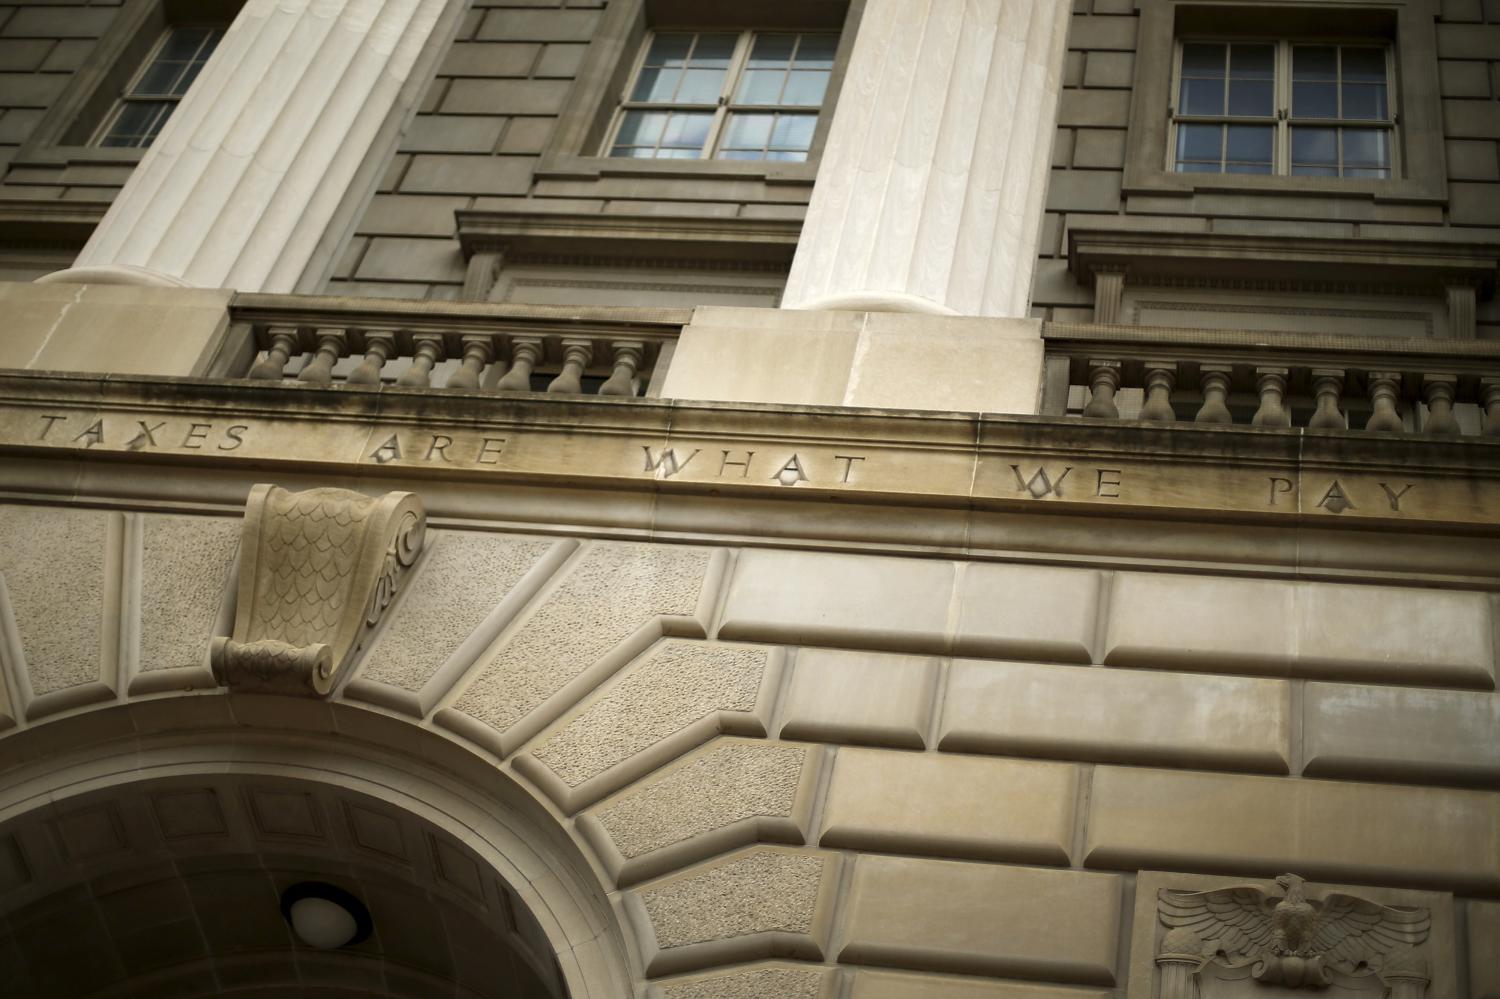 A general view of the U.S. Internal Revenue Service (IRS) building, with the partial quote "taxes are what we pay," in Washington May 27, 2015. Tax return information for about 100,000 U.S. taxpayers was illegally accessed by cyber criminals over the past four months, U.S. IRS Commissioner John Koskinen said on Tuesday, the latest in a series of data thefts that have alarmed American consumers. The entire quote chiseled on the building, from Oliver Wendell Holmes, reads, "Taxes are what we pay for a civilized society''. REUTERS/Jonathan Ernst